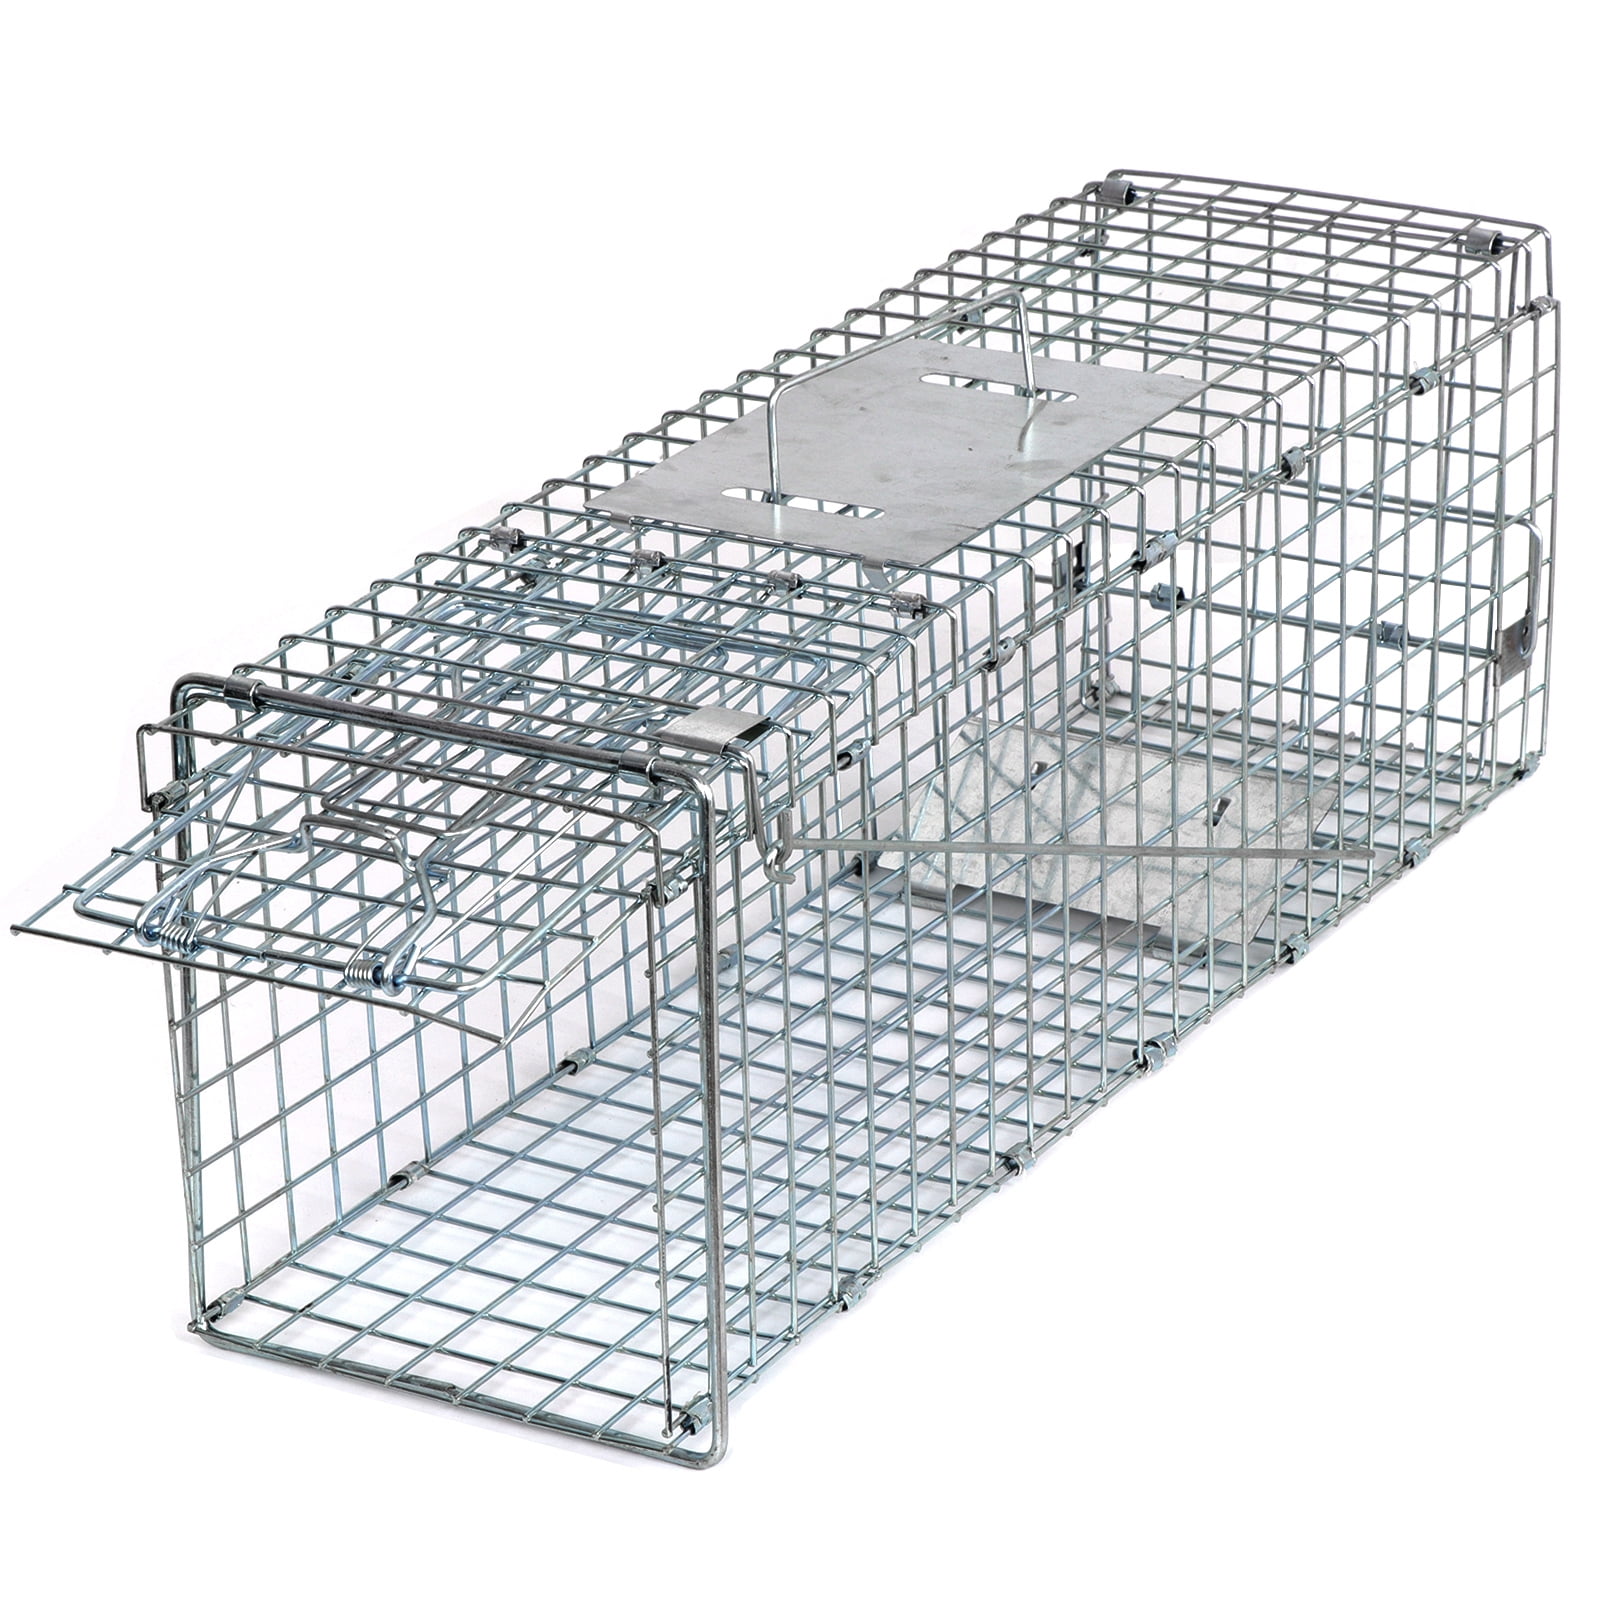 32'' Humane Live Animal Trap 1 Door Rodent Cage for Rabbits Cat Raccoon Squirrel 